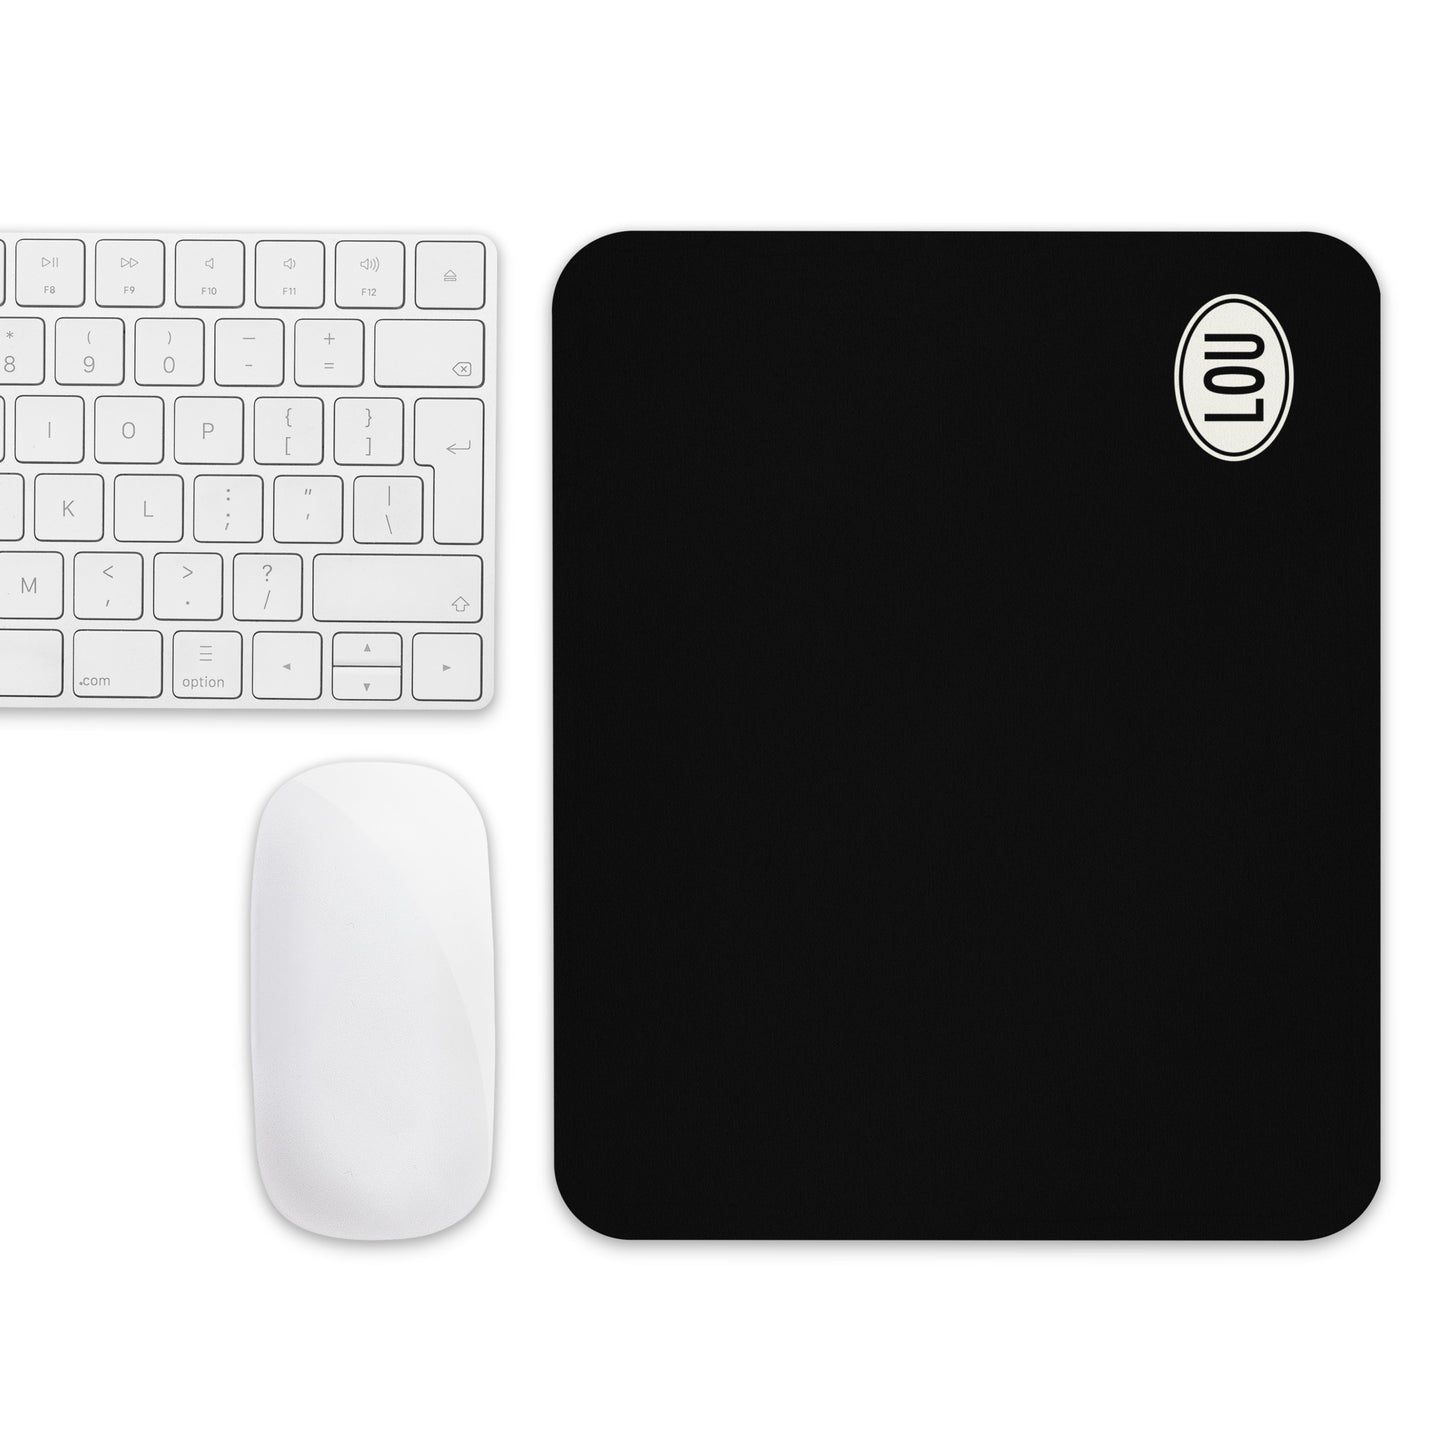 Unique Travel Gift Mouse Pad - White Oval • LOU Louisville • YHM Designs - Image 04